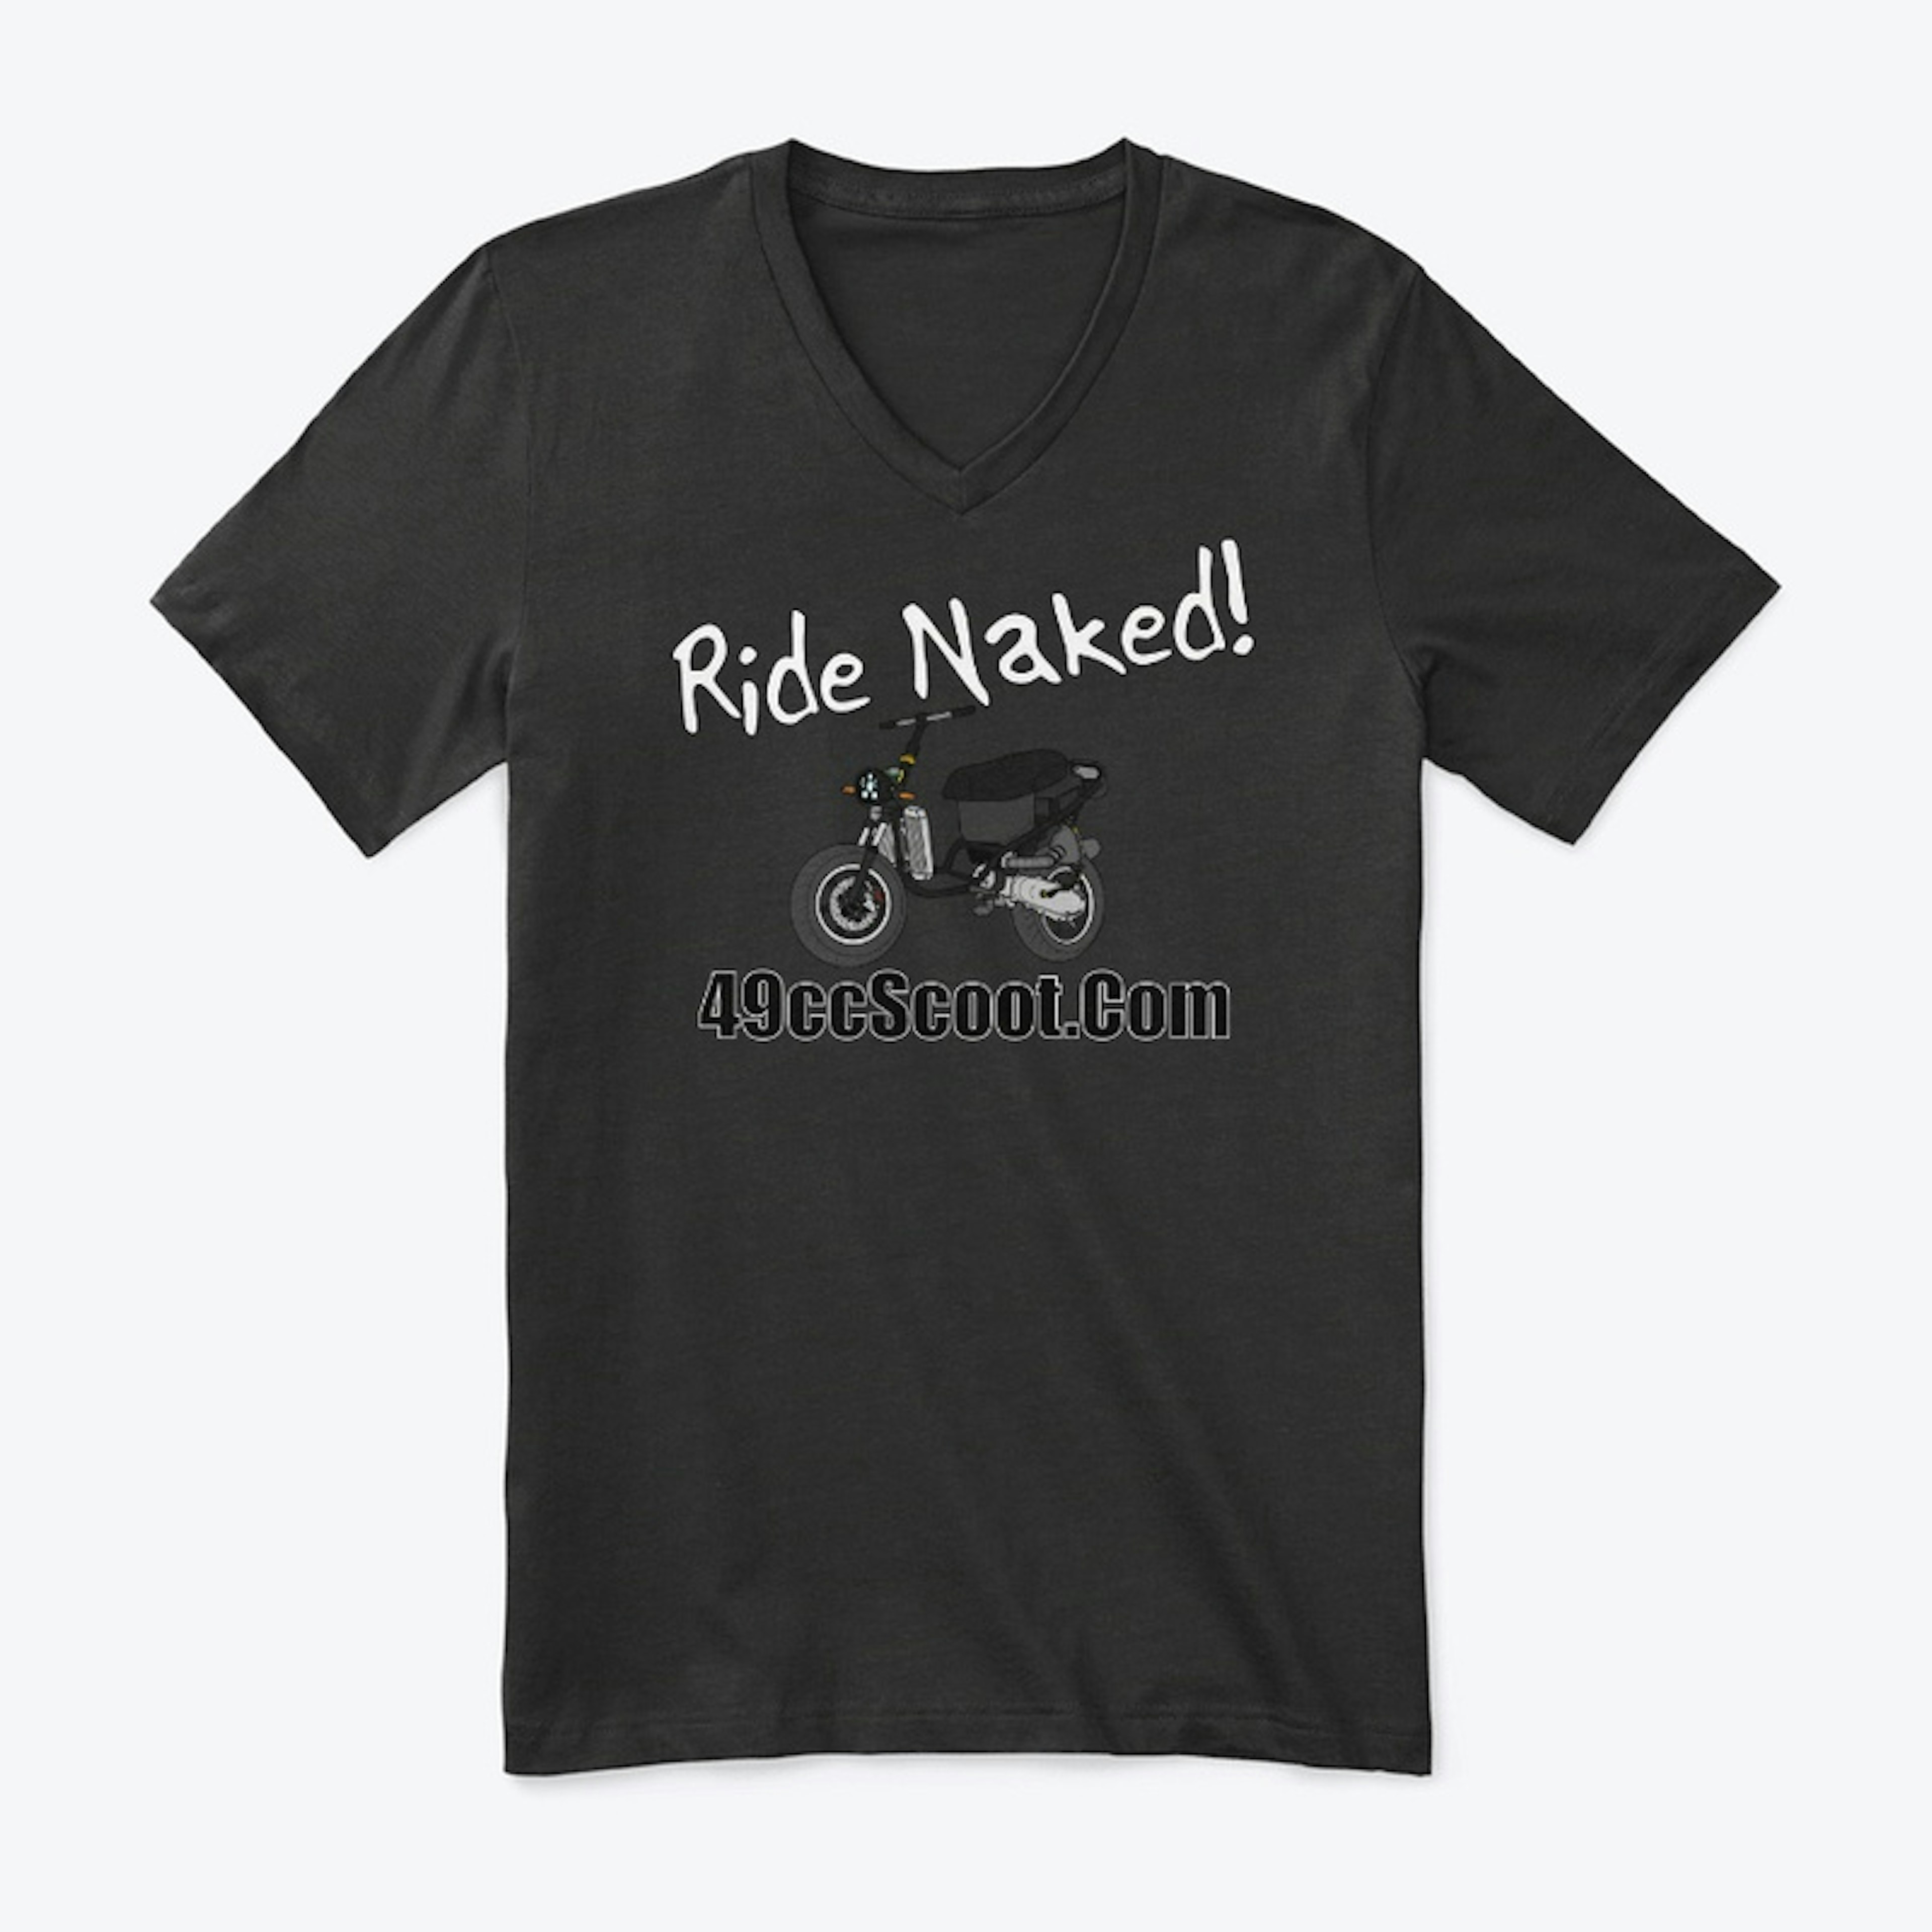 Ride Naked!